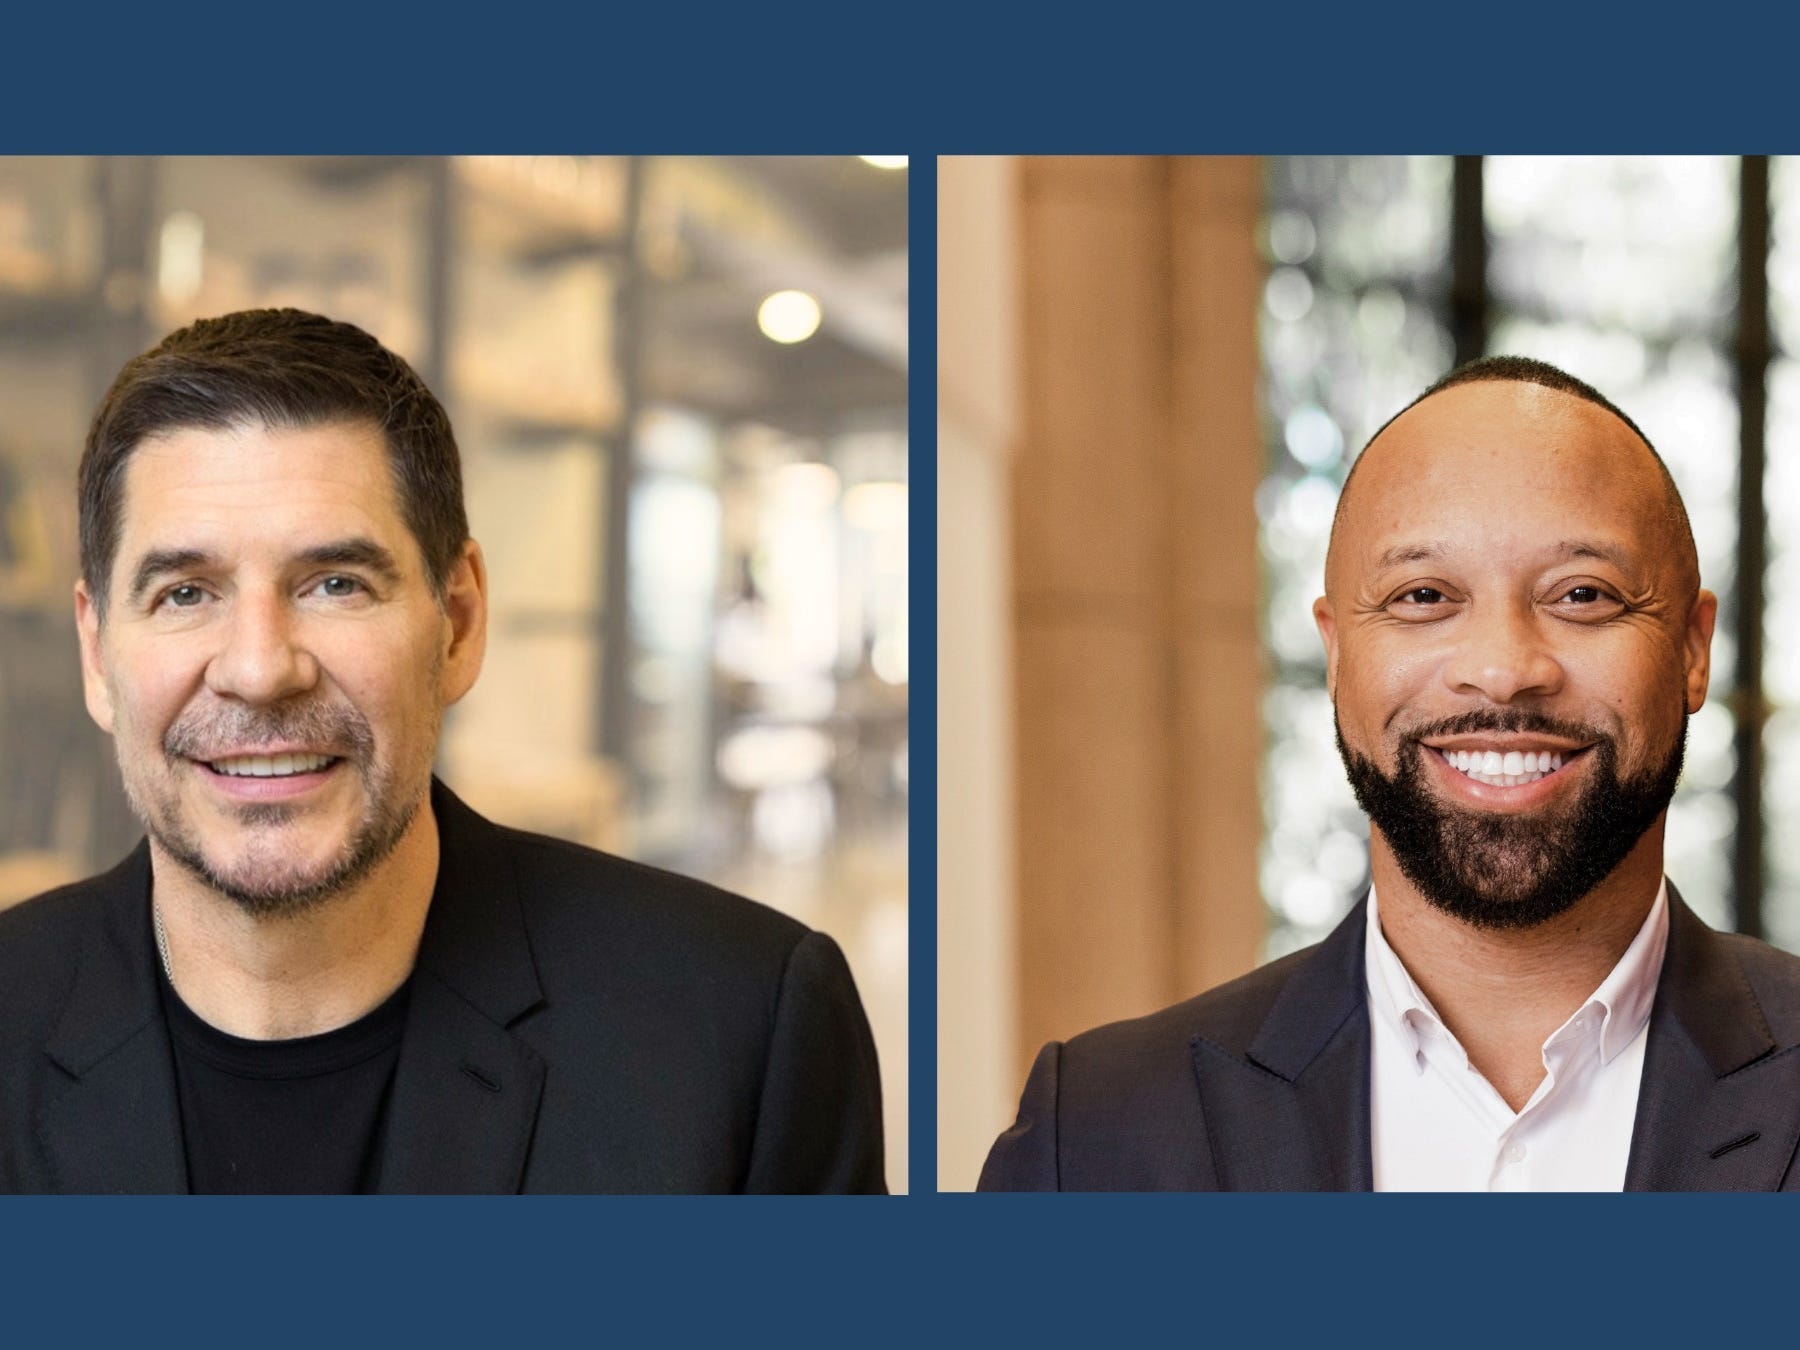 marcelo-claure-and-paul-judge-bought-softbank’s-diversity-fund-now-they’re-trying-to-raise-$200-million-for-it.